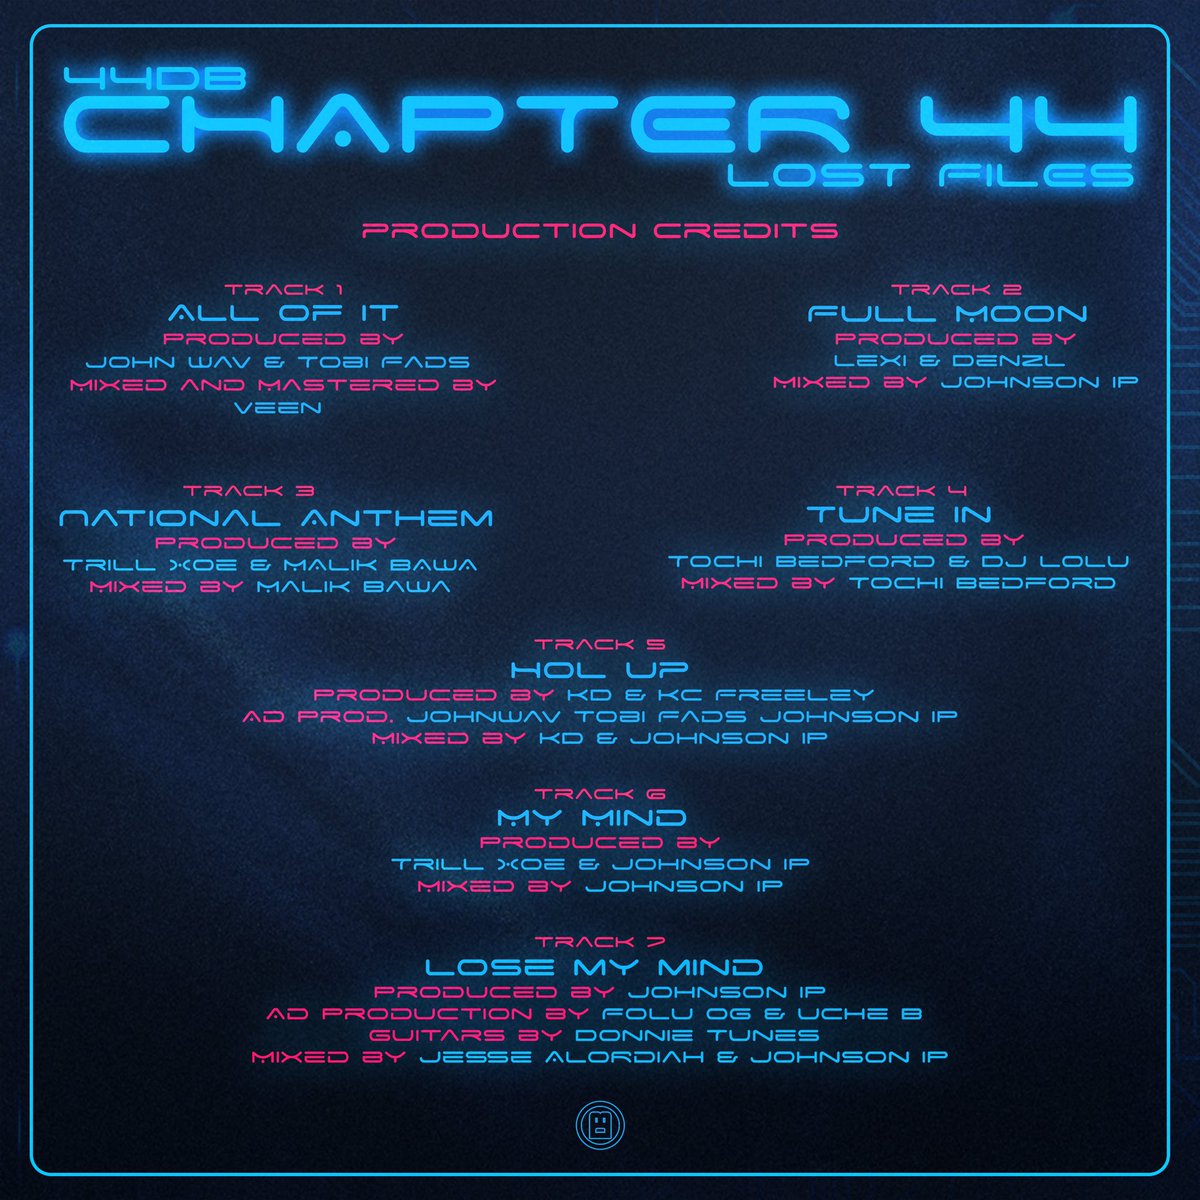 Introducing Chapter 44 : Lost Files. 2044📍 continues as we present to you our first 44DB project featuring many talented artists and our talented producers. Set to release on the 12th of April, join us on this ride for a one of a kind sonic experience.